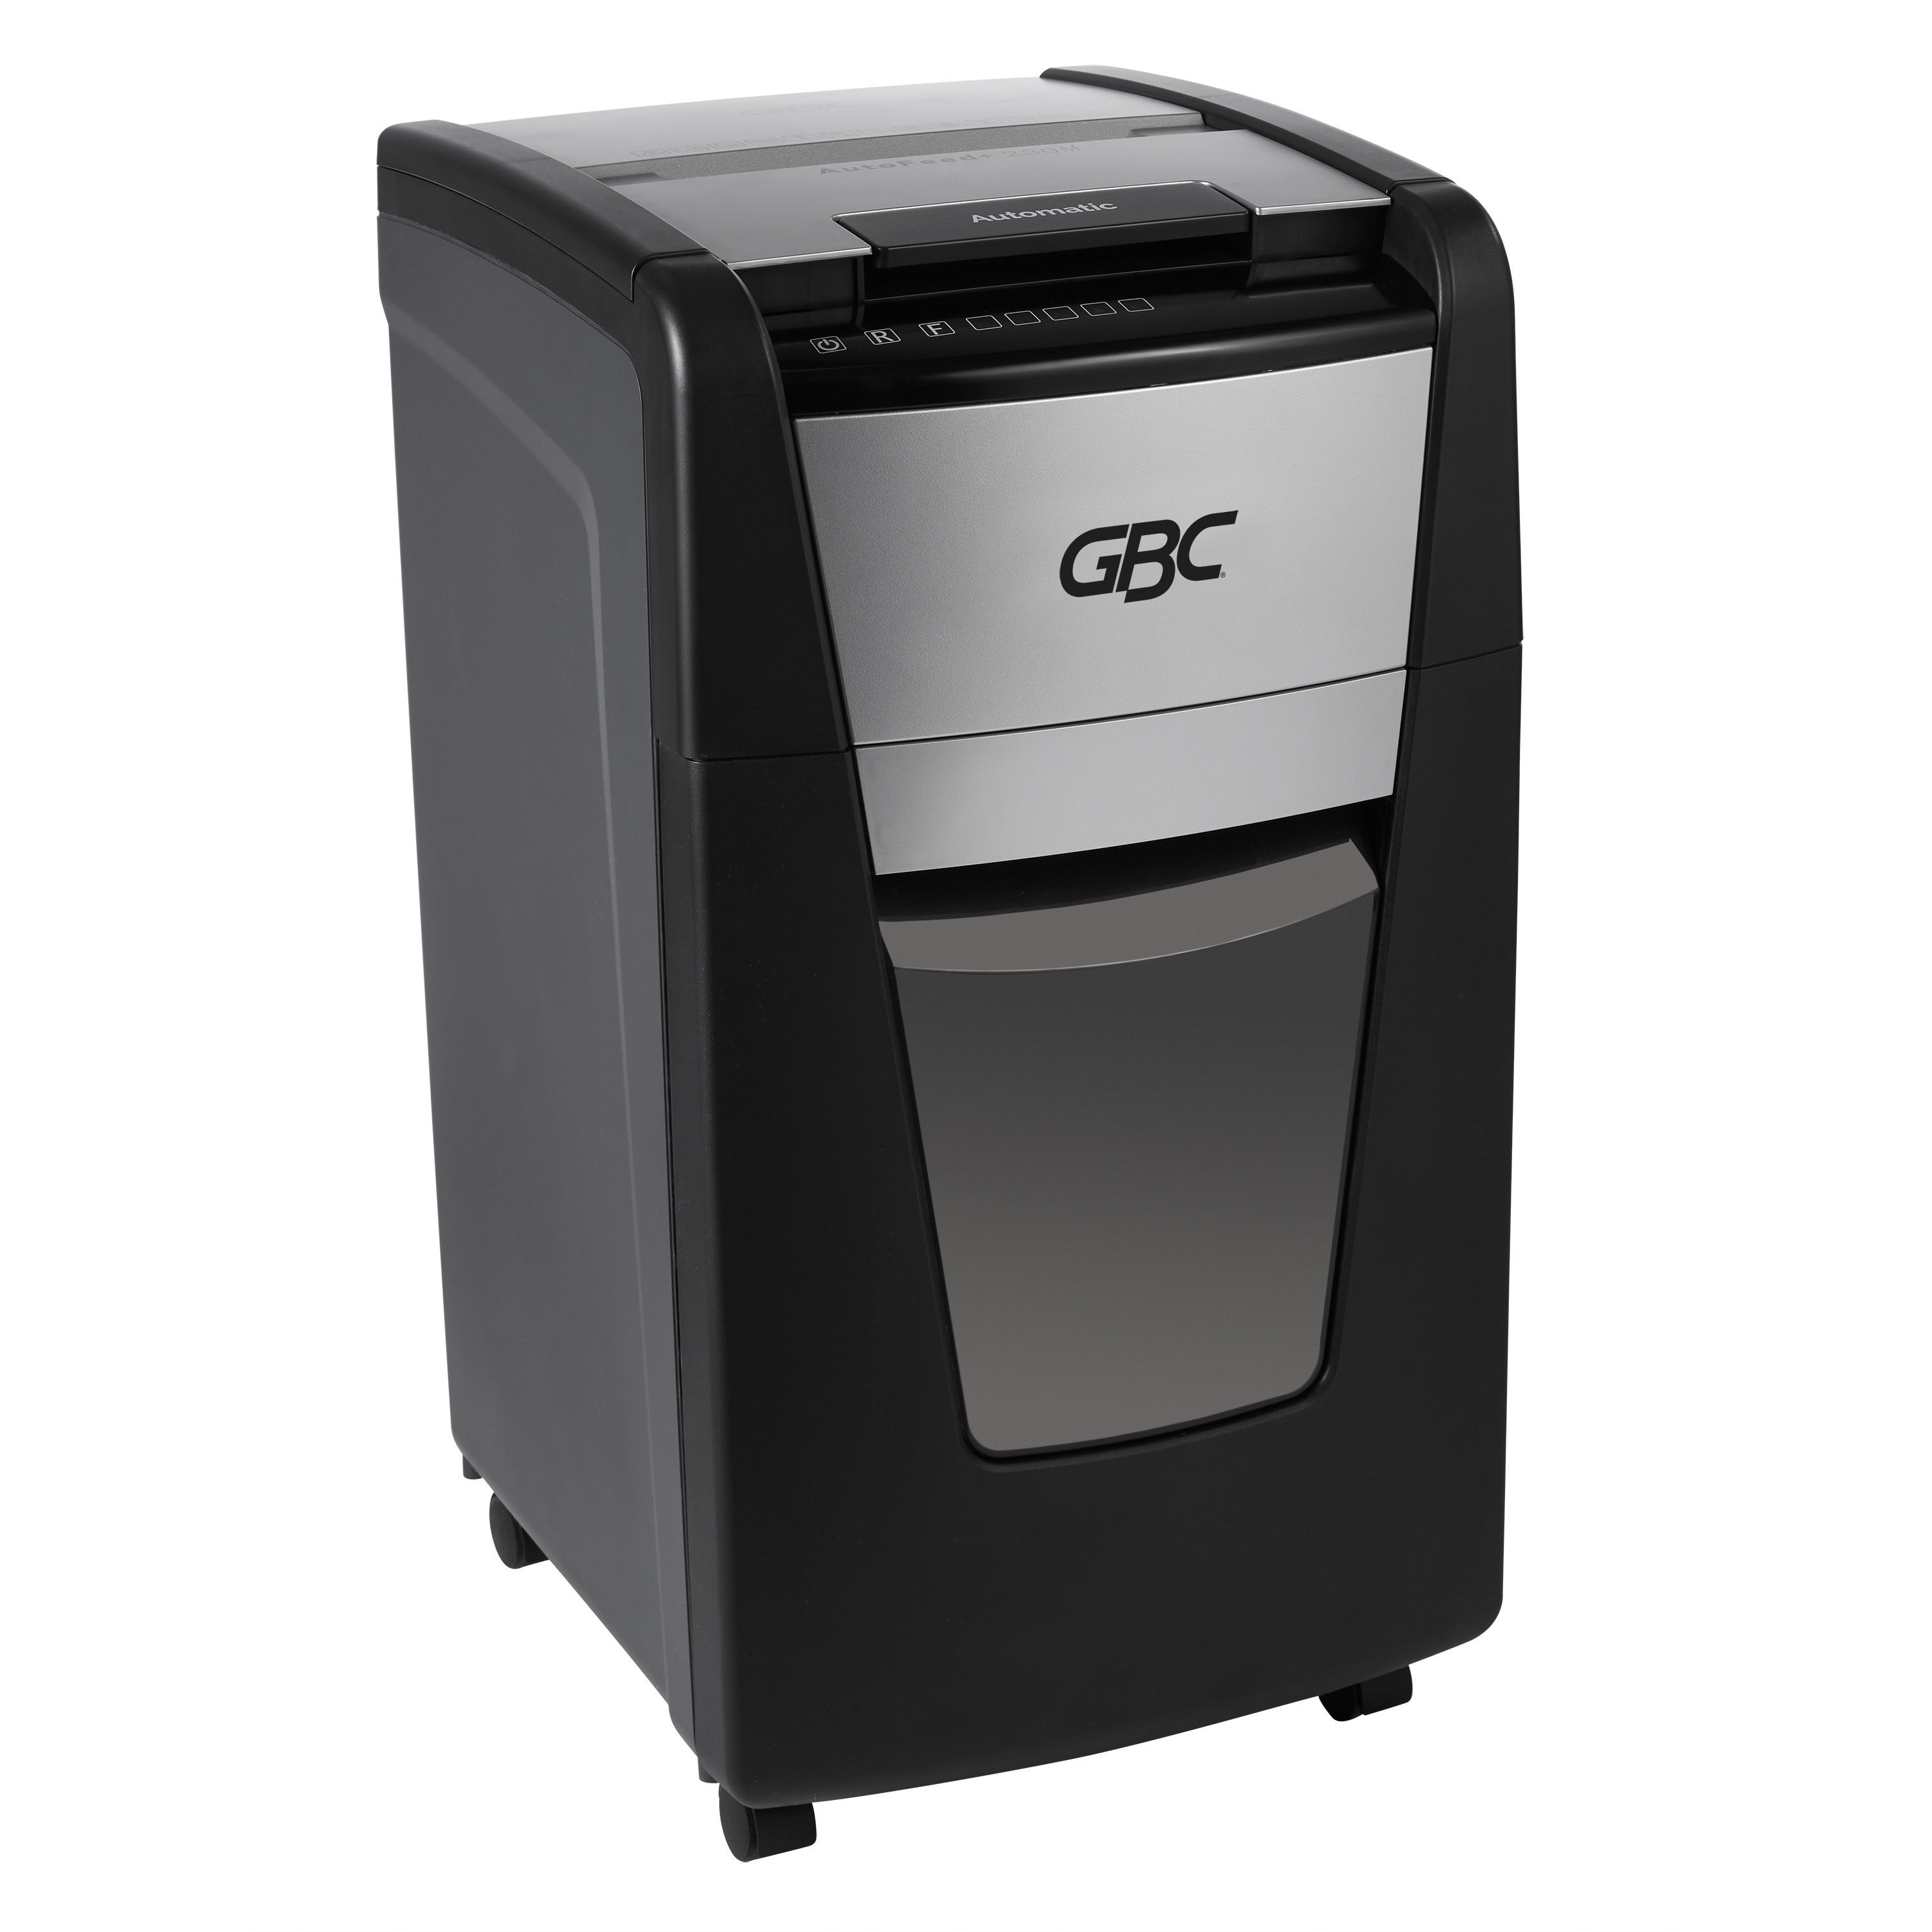 gbc-autofeed+-small-office-shredder-230m-micro-cut-230-sheets-continuous-shredder-micro-cut-8-per-pass-for-shredding-credit-card-paper-clip-staples-paper-p-5-30-minute-run-time-16-gal-wastebin-capacity-black_gbcwsm1757607 - 1